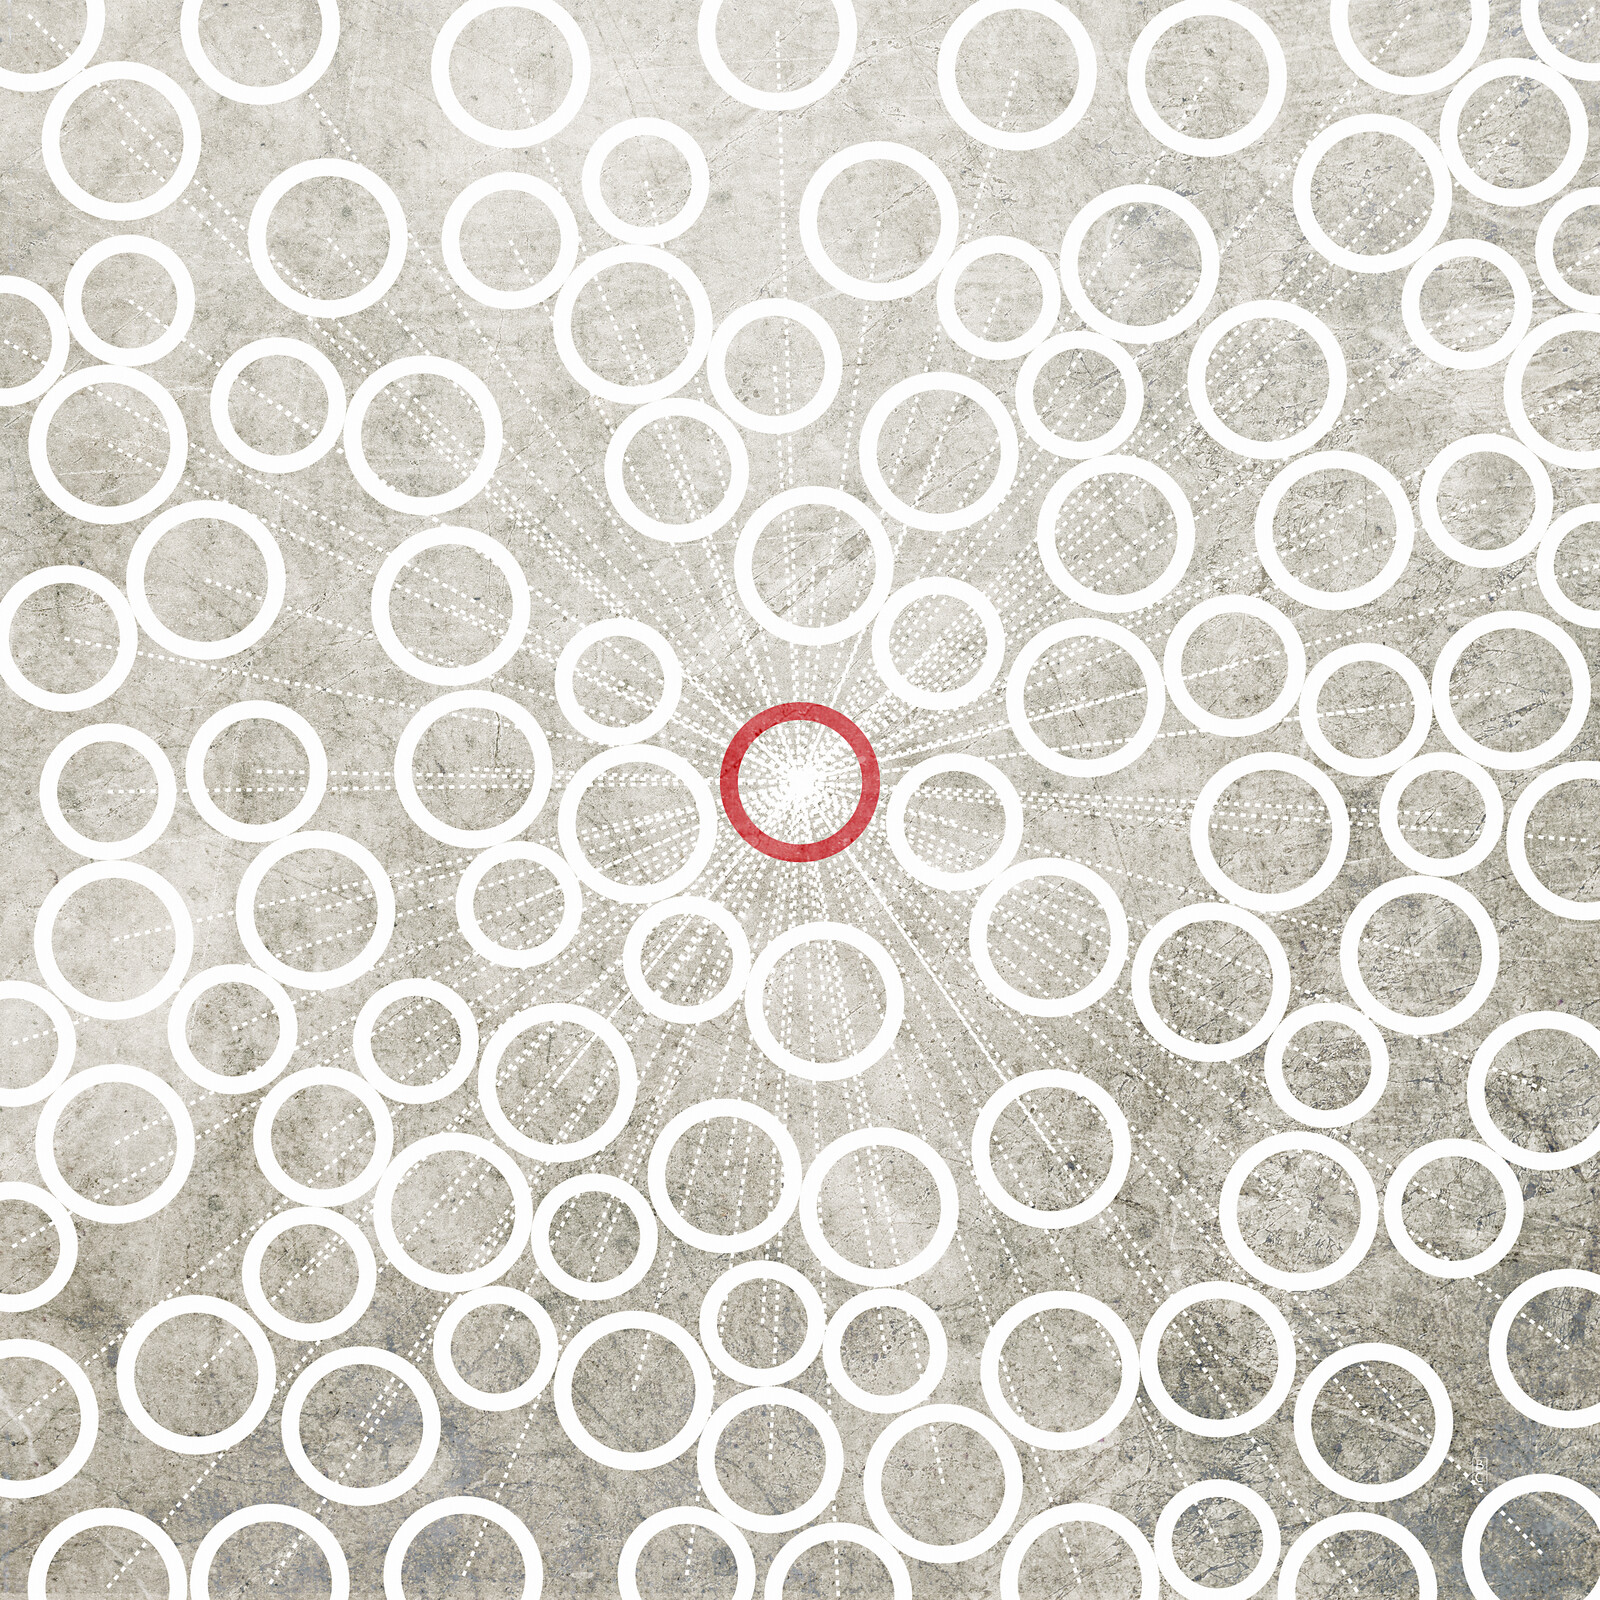 A hollow red circle surrounded by lots of hollow white circles. There are tiny white dashed lines from the center of the red circle to the center of each white circle.